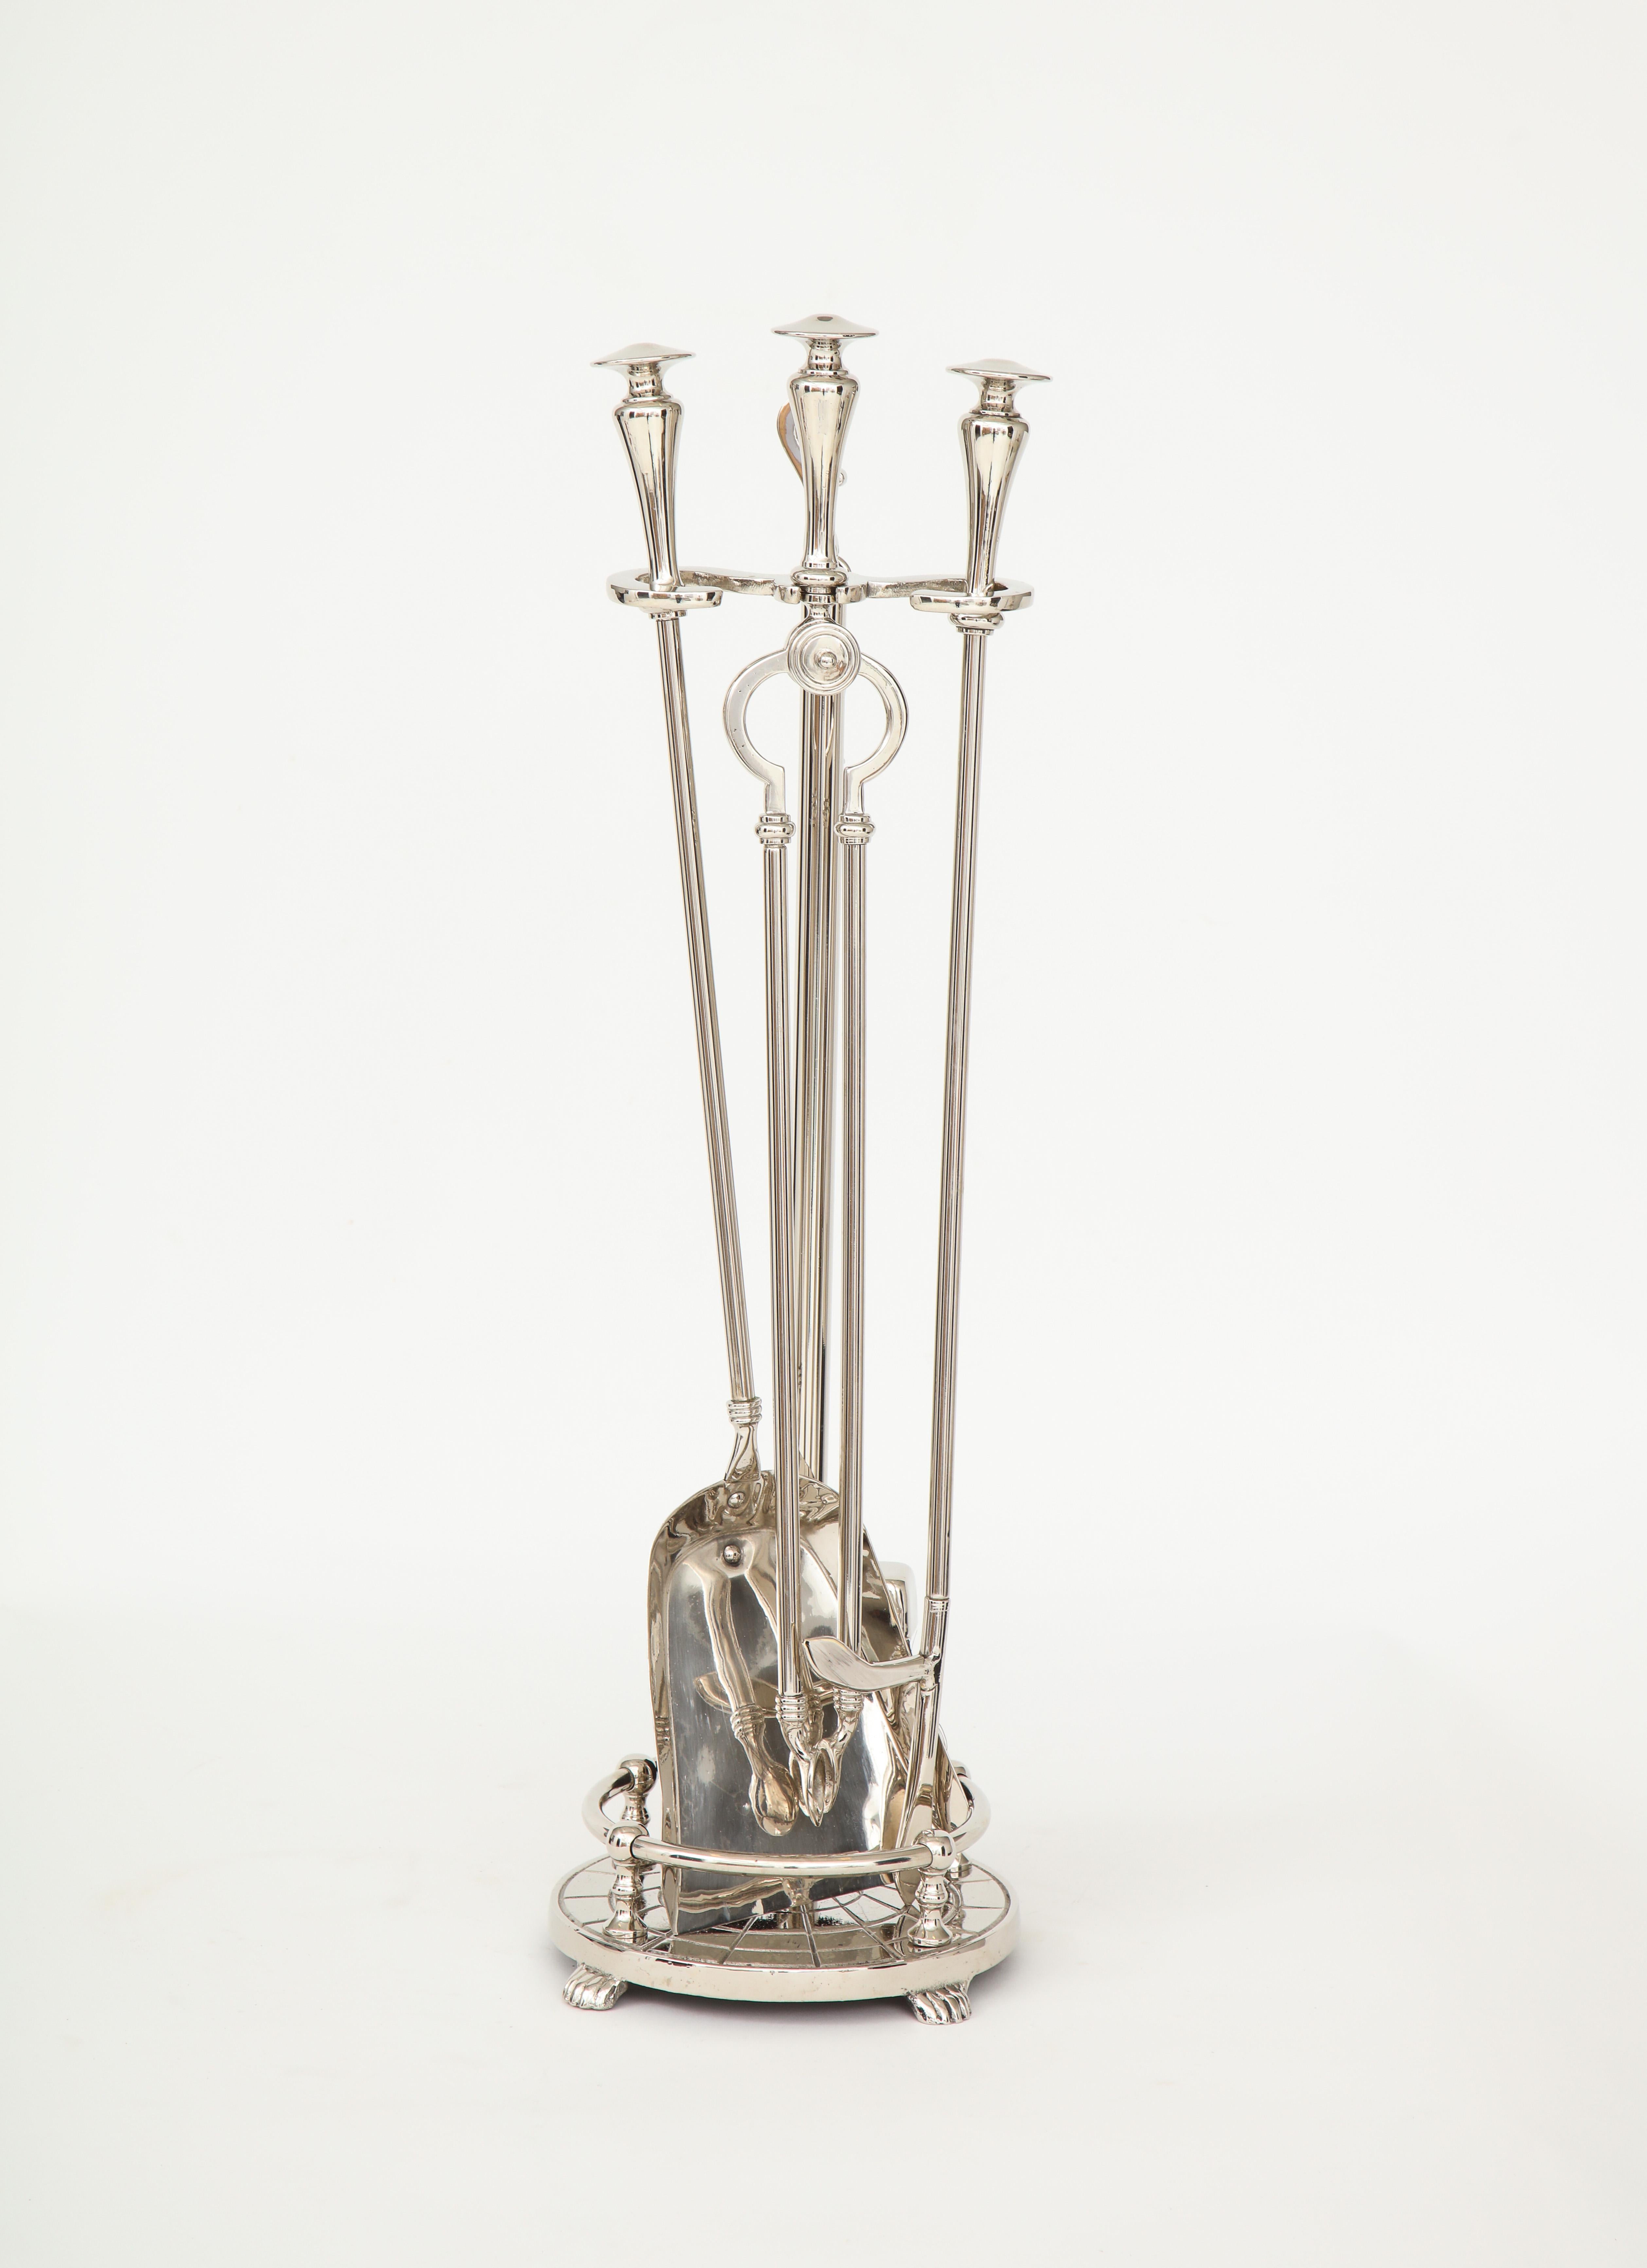 Set of Art Deco polished nickel fire tools featuring stylized finials. Set includes stand, poker, broom, and shovel.